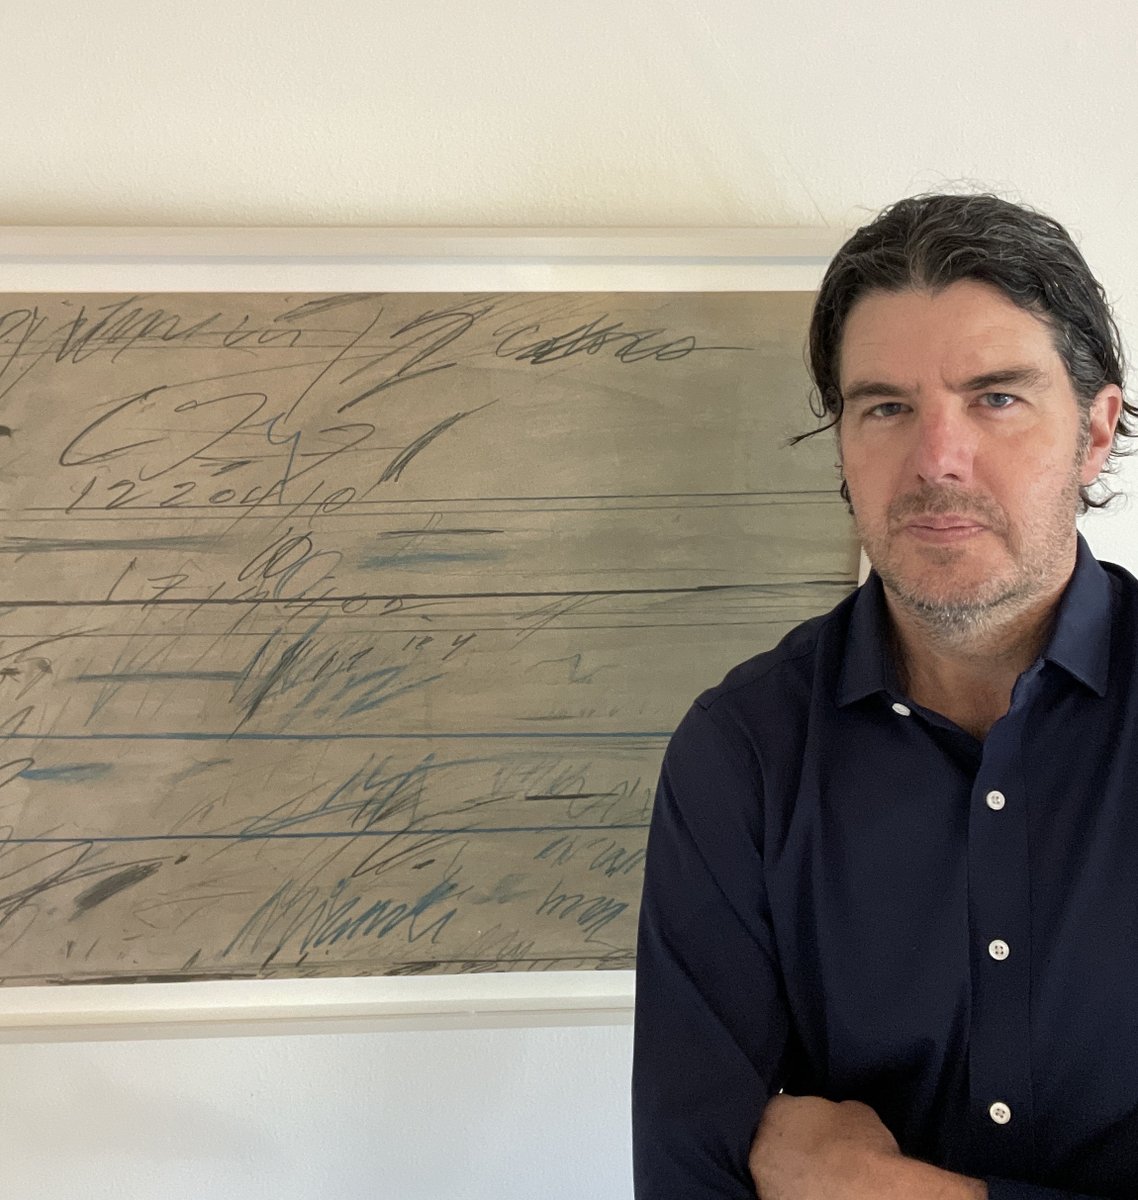 The poet @deanrader spent much of the pandemic happily obsessed with the work of the artist Cy Twombly. And now Dean would like to share some of what he learned: This Saturday, he's leading a workshop whose focus is writing about art. To sign up, go to zyzzyva.org/workshops/